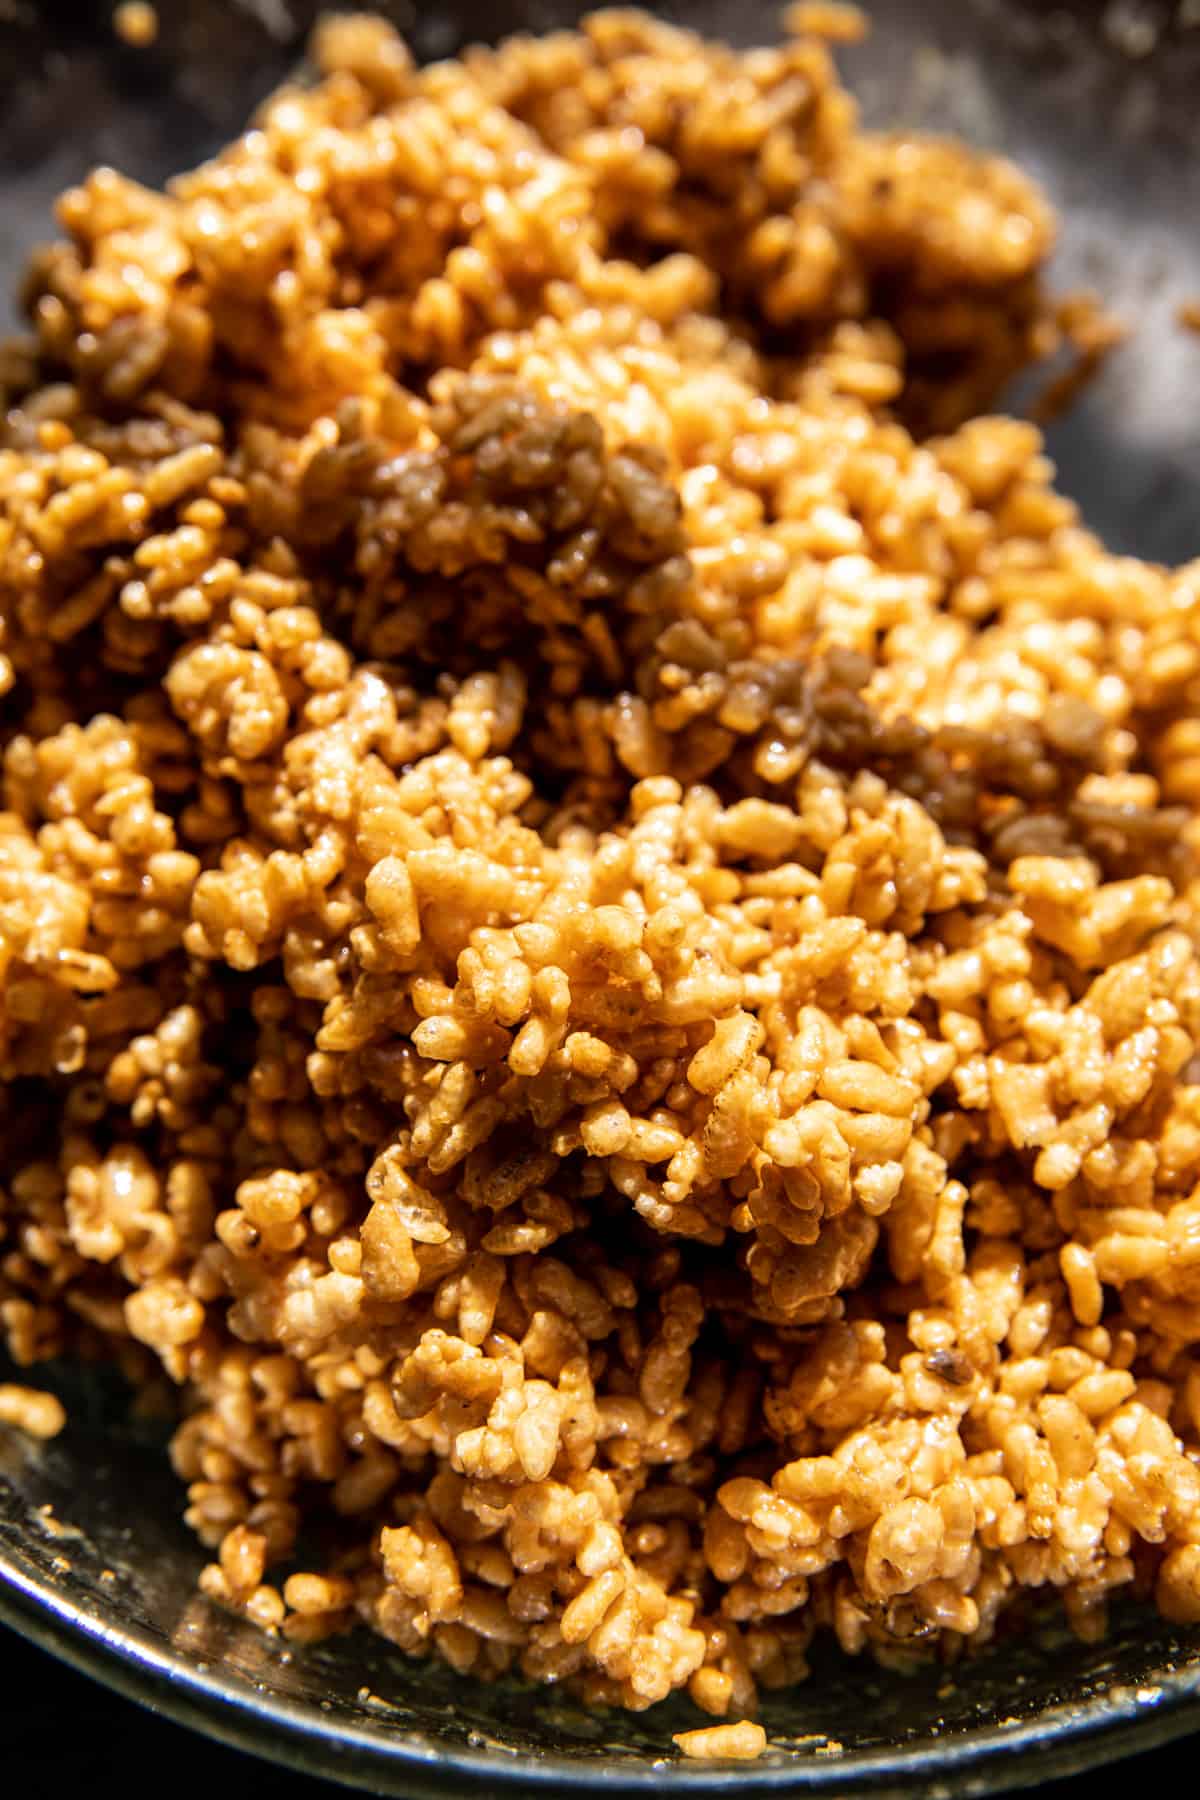 brown rice krispies mixed with peanut butter in bowl 